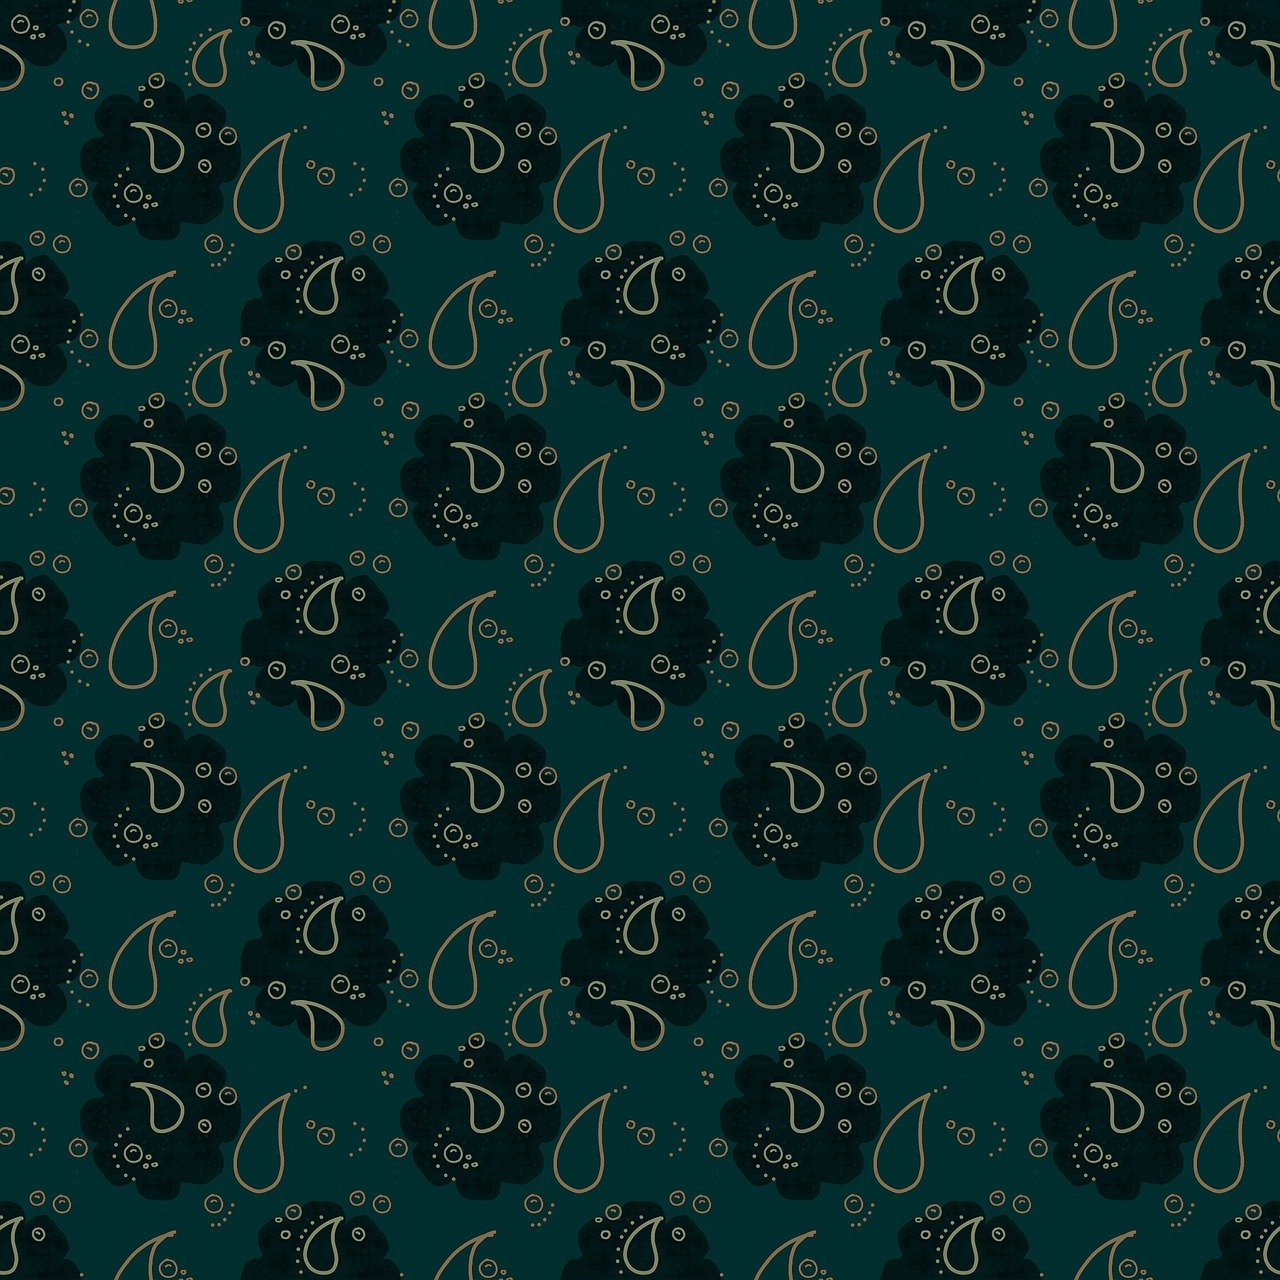 a black and gold paisley pattern on a teal green background, tumblr, generative art, background image, arabic calligraphy, rainy background, repeating pattern. seamless